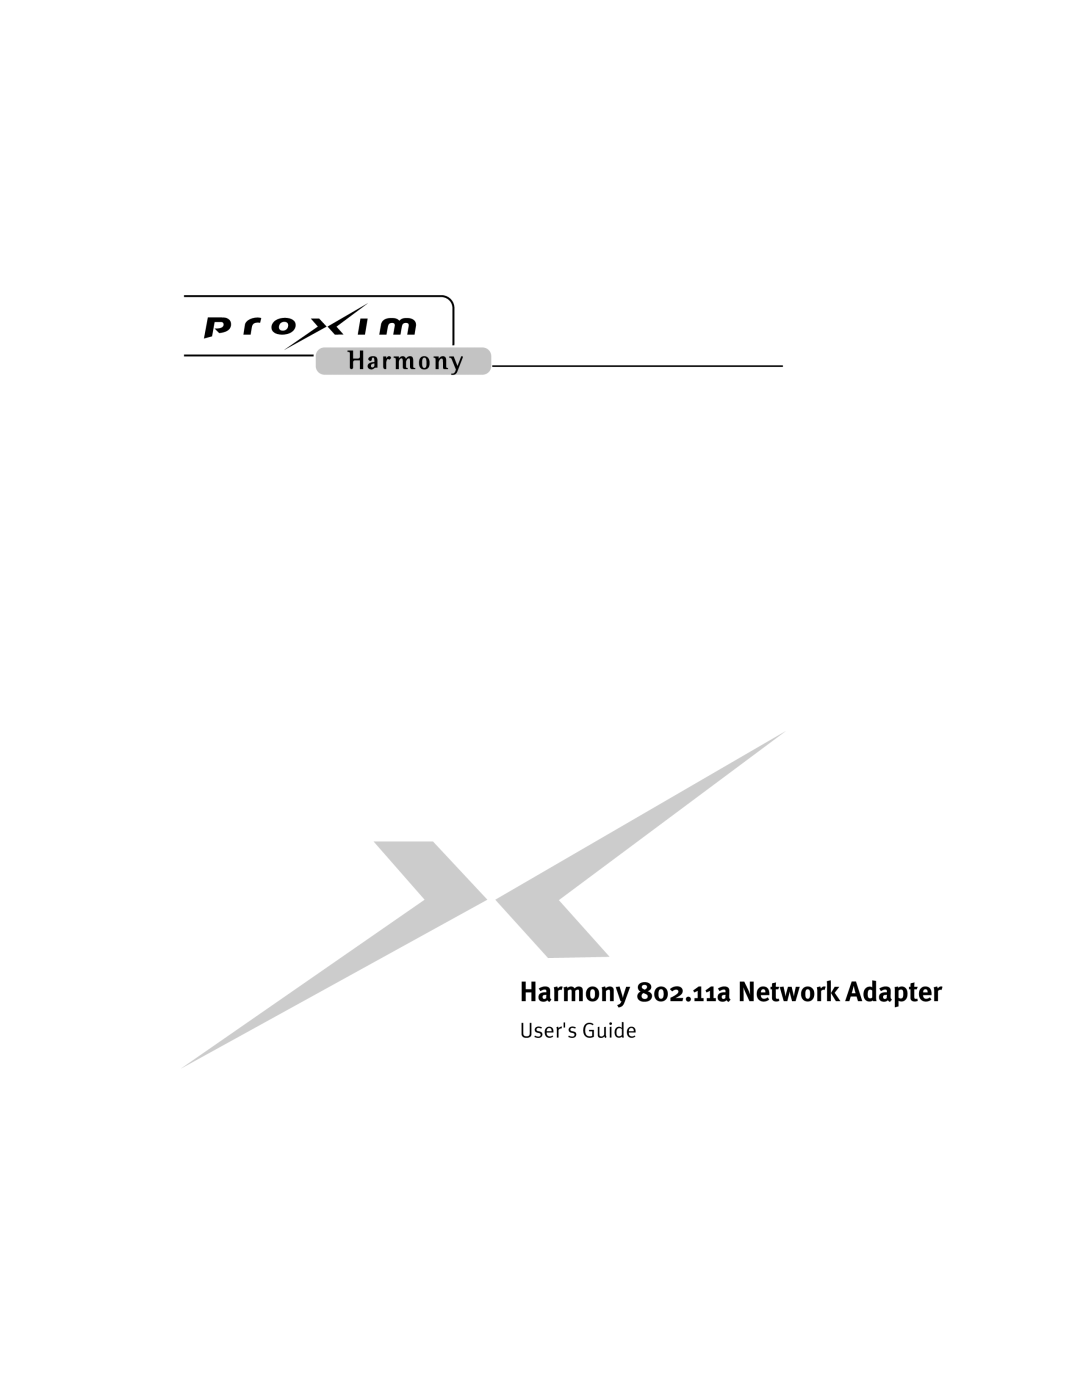 Harmony House manual Users Guide, Harmony 802.11a Network Adapter, H a r m o n y 